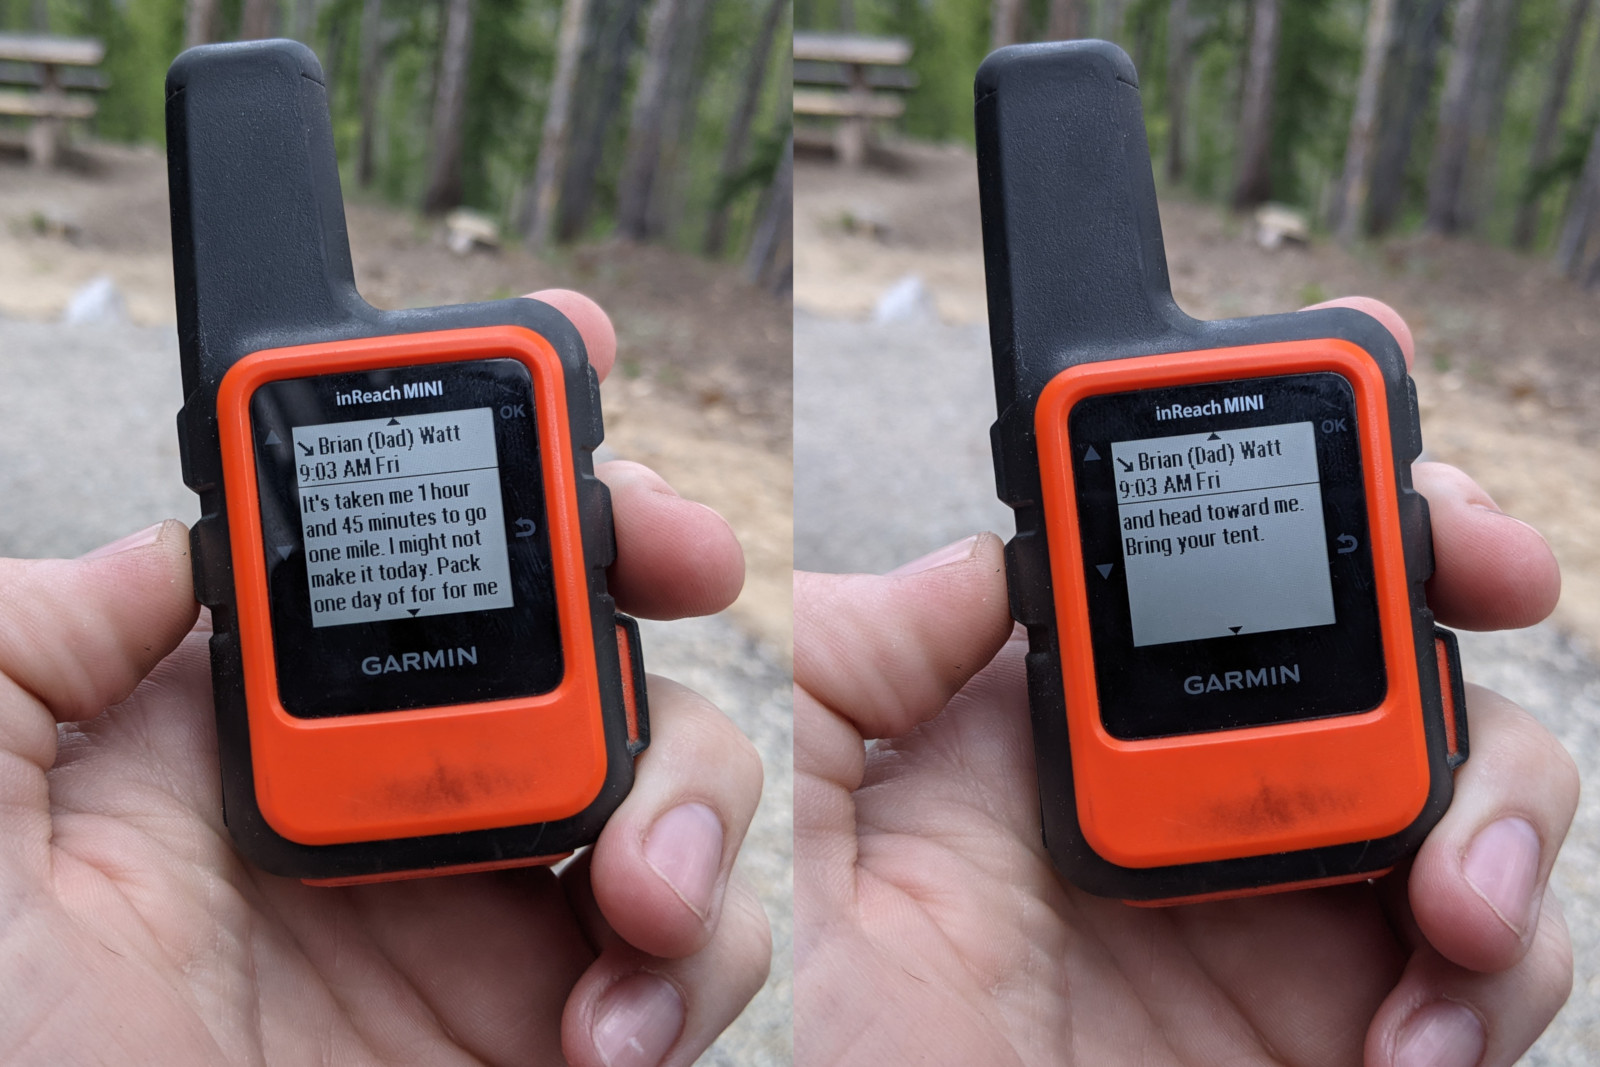 Collage of 2 photos of the inReach MINI screen showing the message above